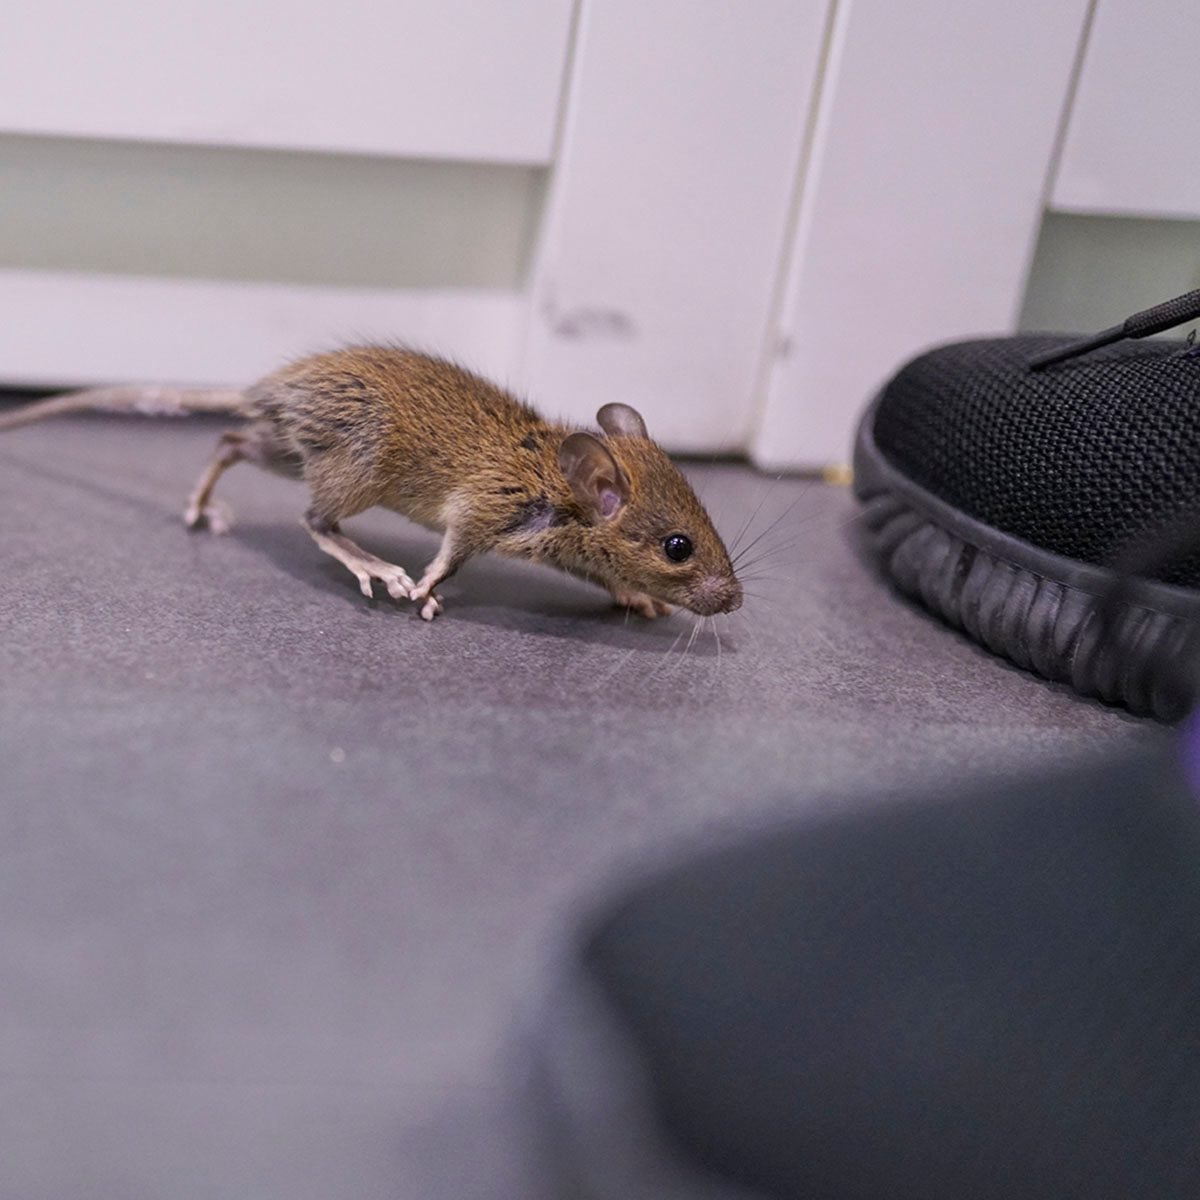 5 Ways To Get Rid Of Mice In Your House (& 8 Ways That Don't Work)